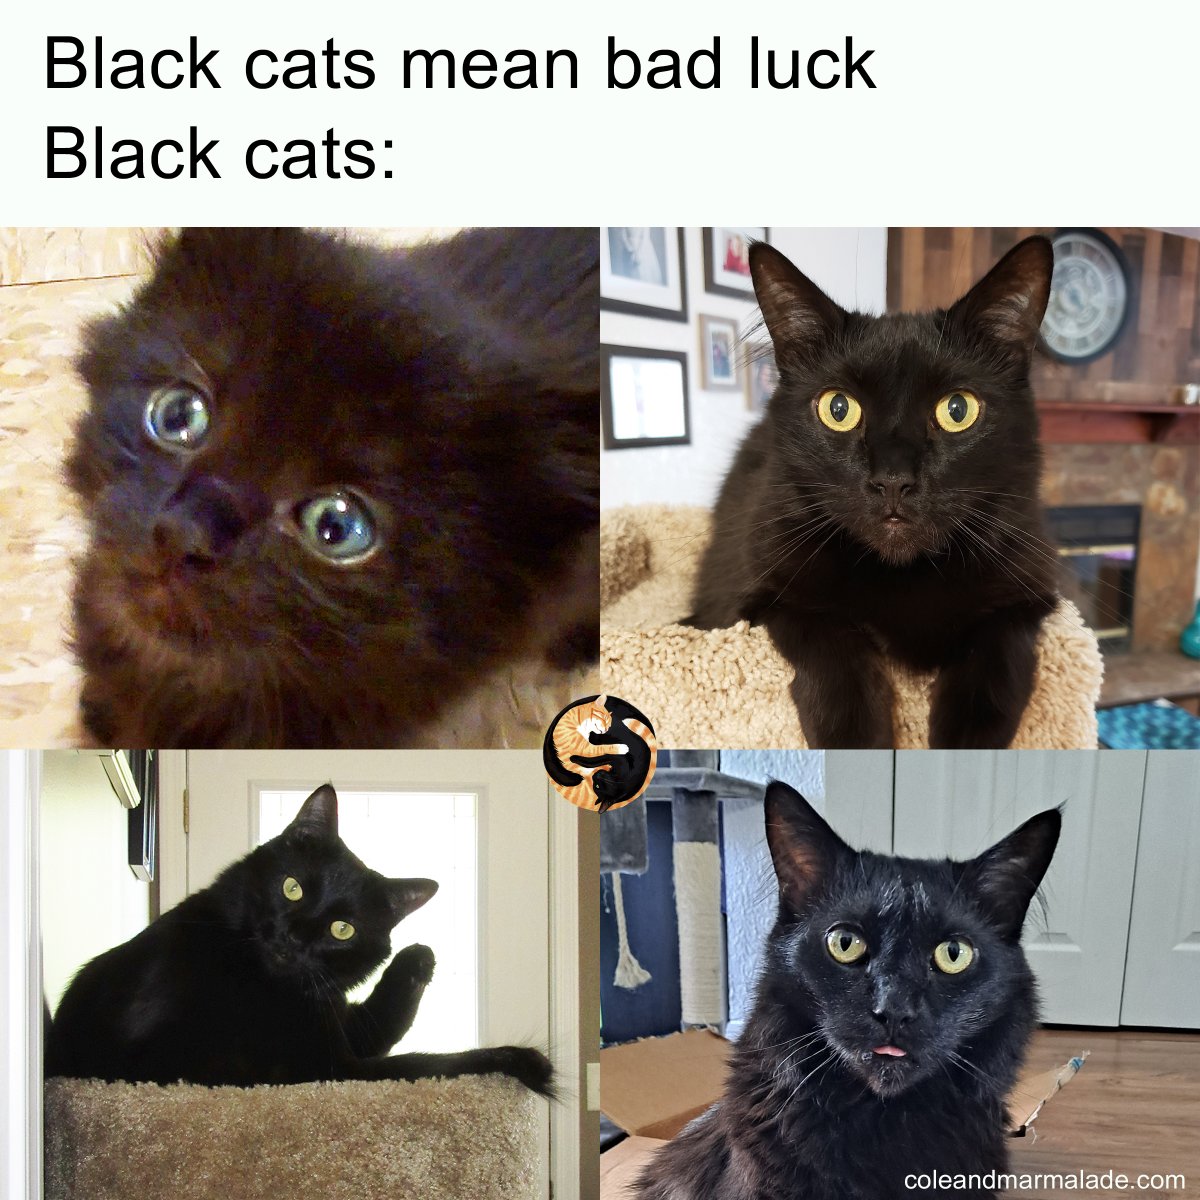 Hit the ❤️ button if you think black cats are GOOD luck!?

#BlackCatsRock #FridayThe13th